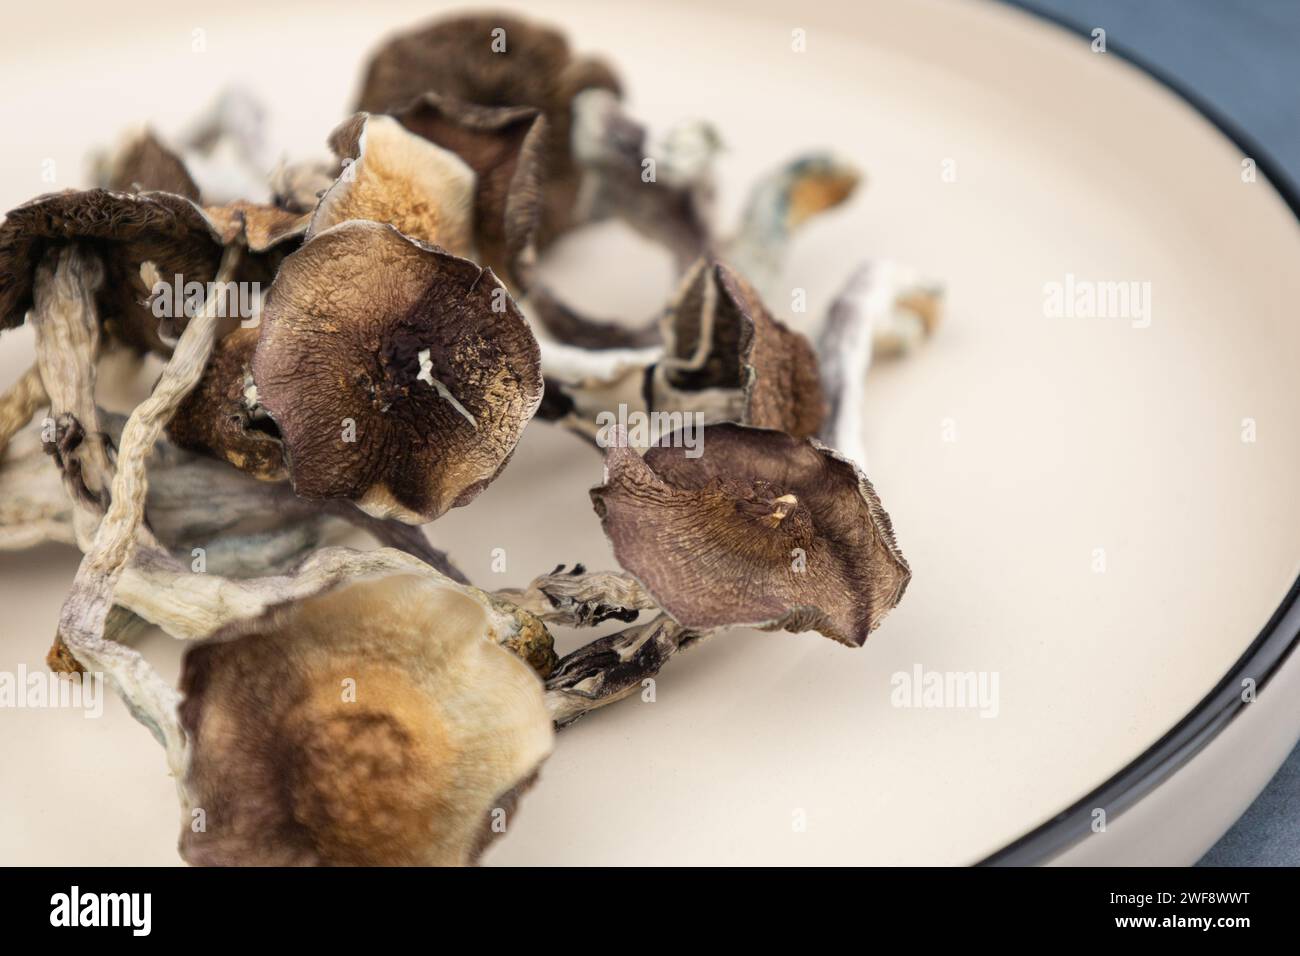 A number of dried mushrooms of the species Psilocybe cubensis Argentina lie on a beige plate.  On a gray background.  Alternative medicine, treatment Stock Photo